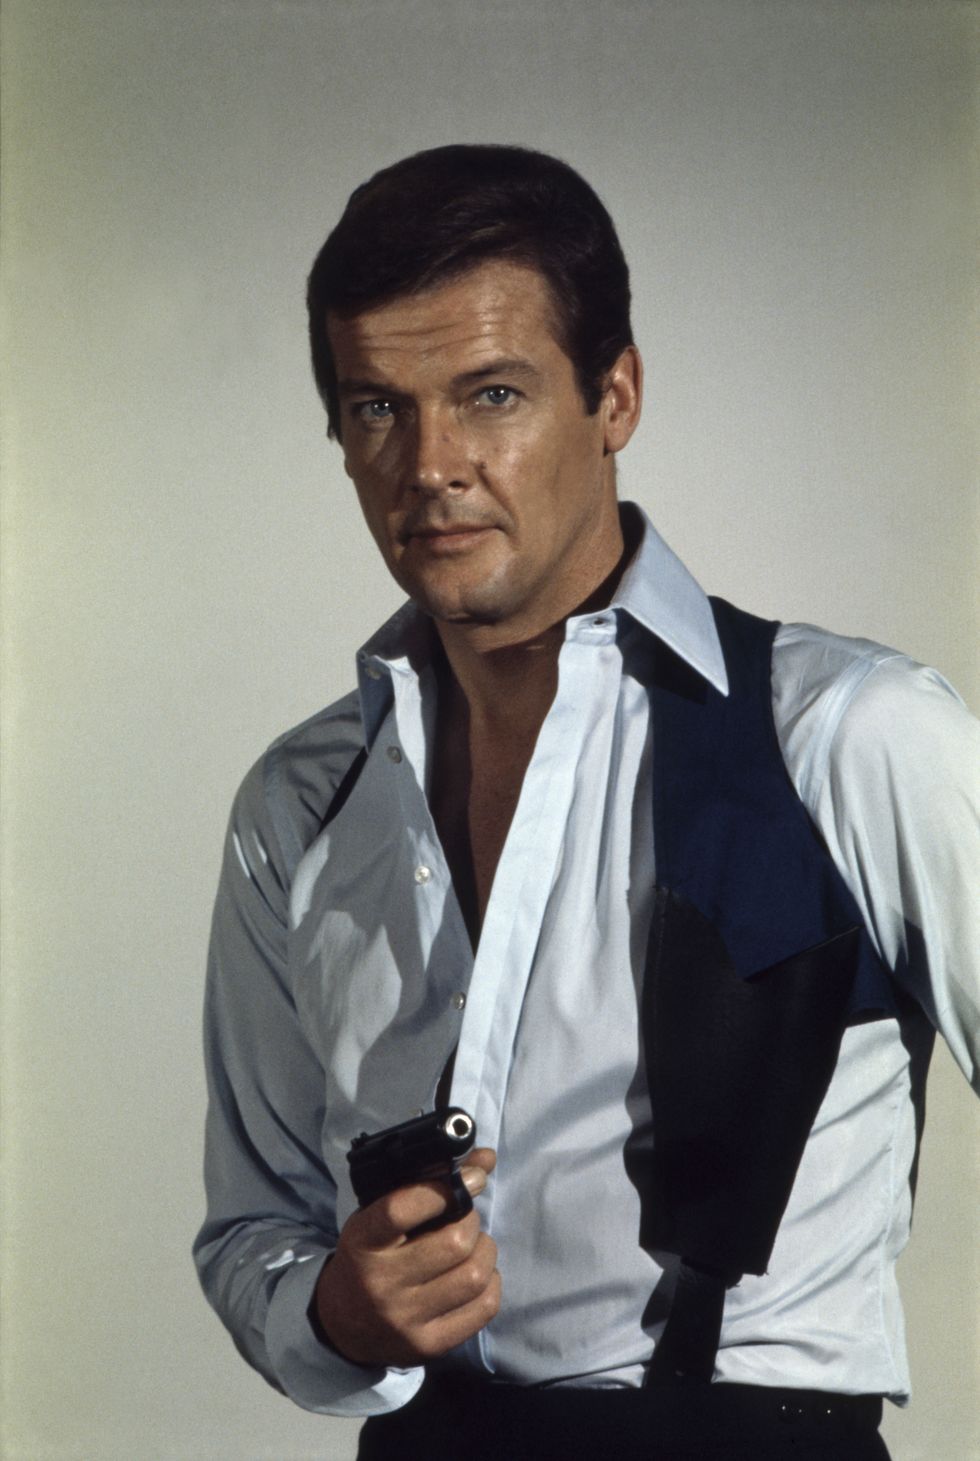 British actor Roger Moore as James Bond from the movie Live and Let Die. (Photo by Terry O'Neill/Getty Images)